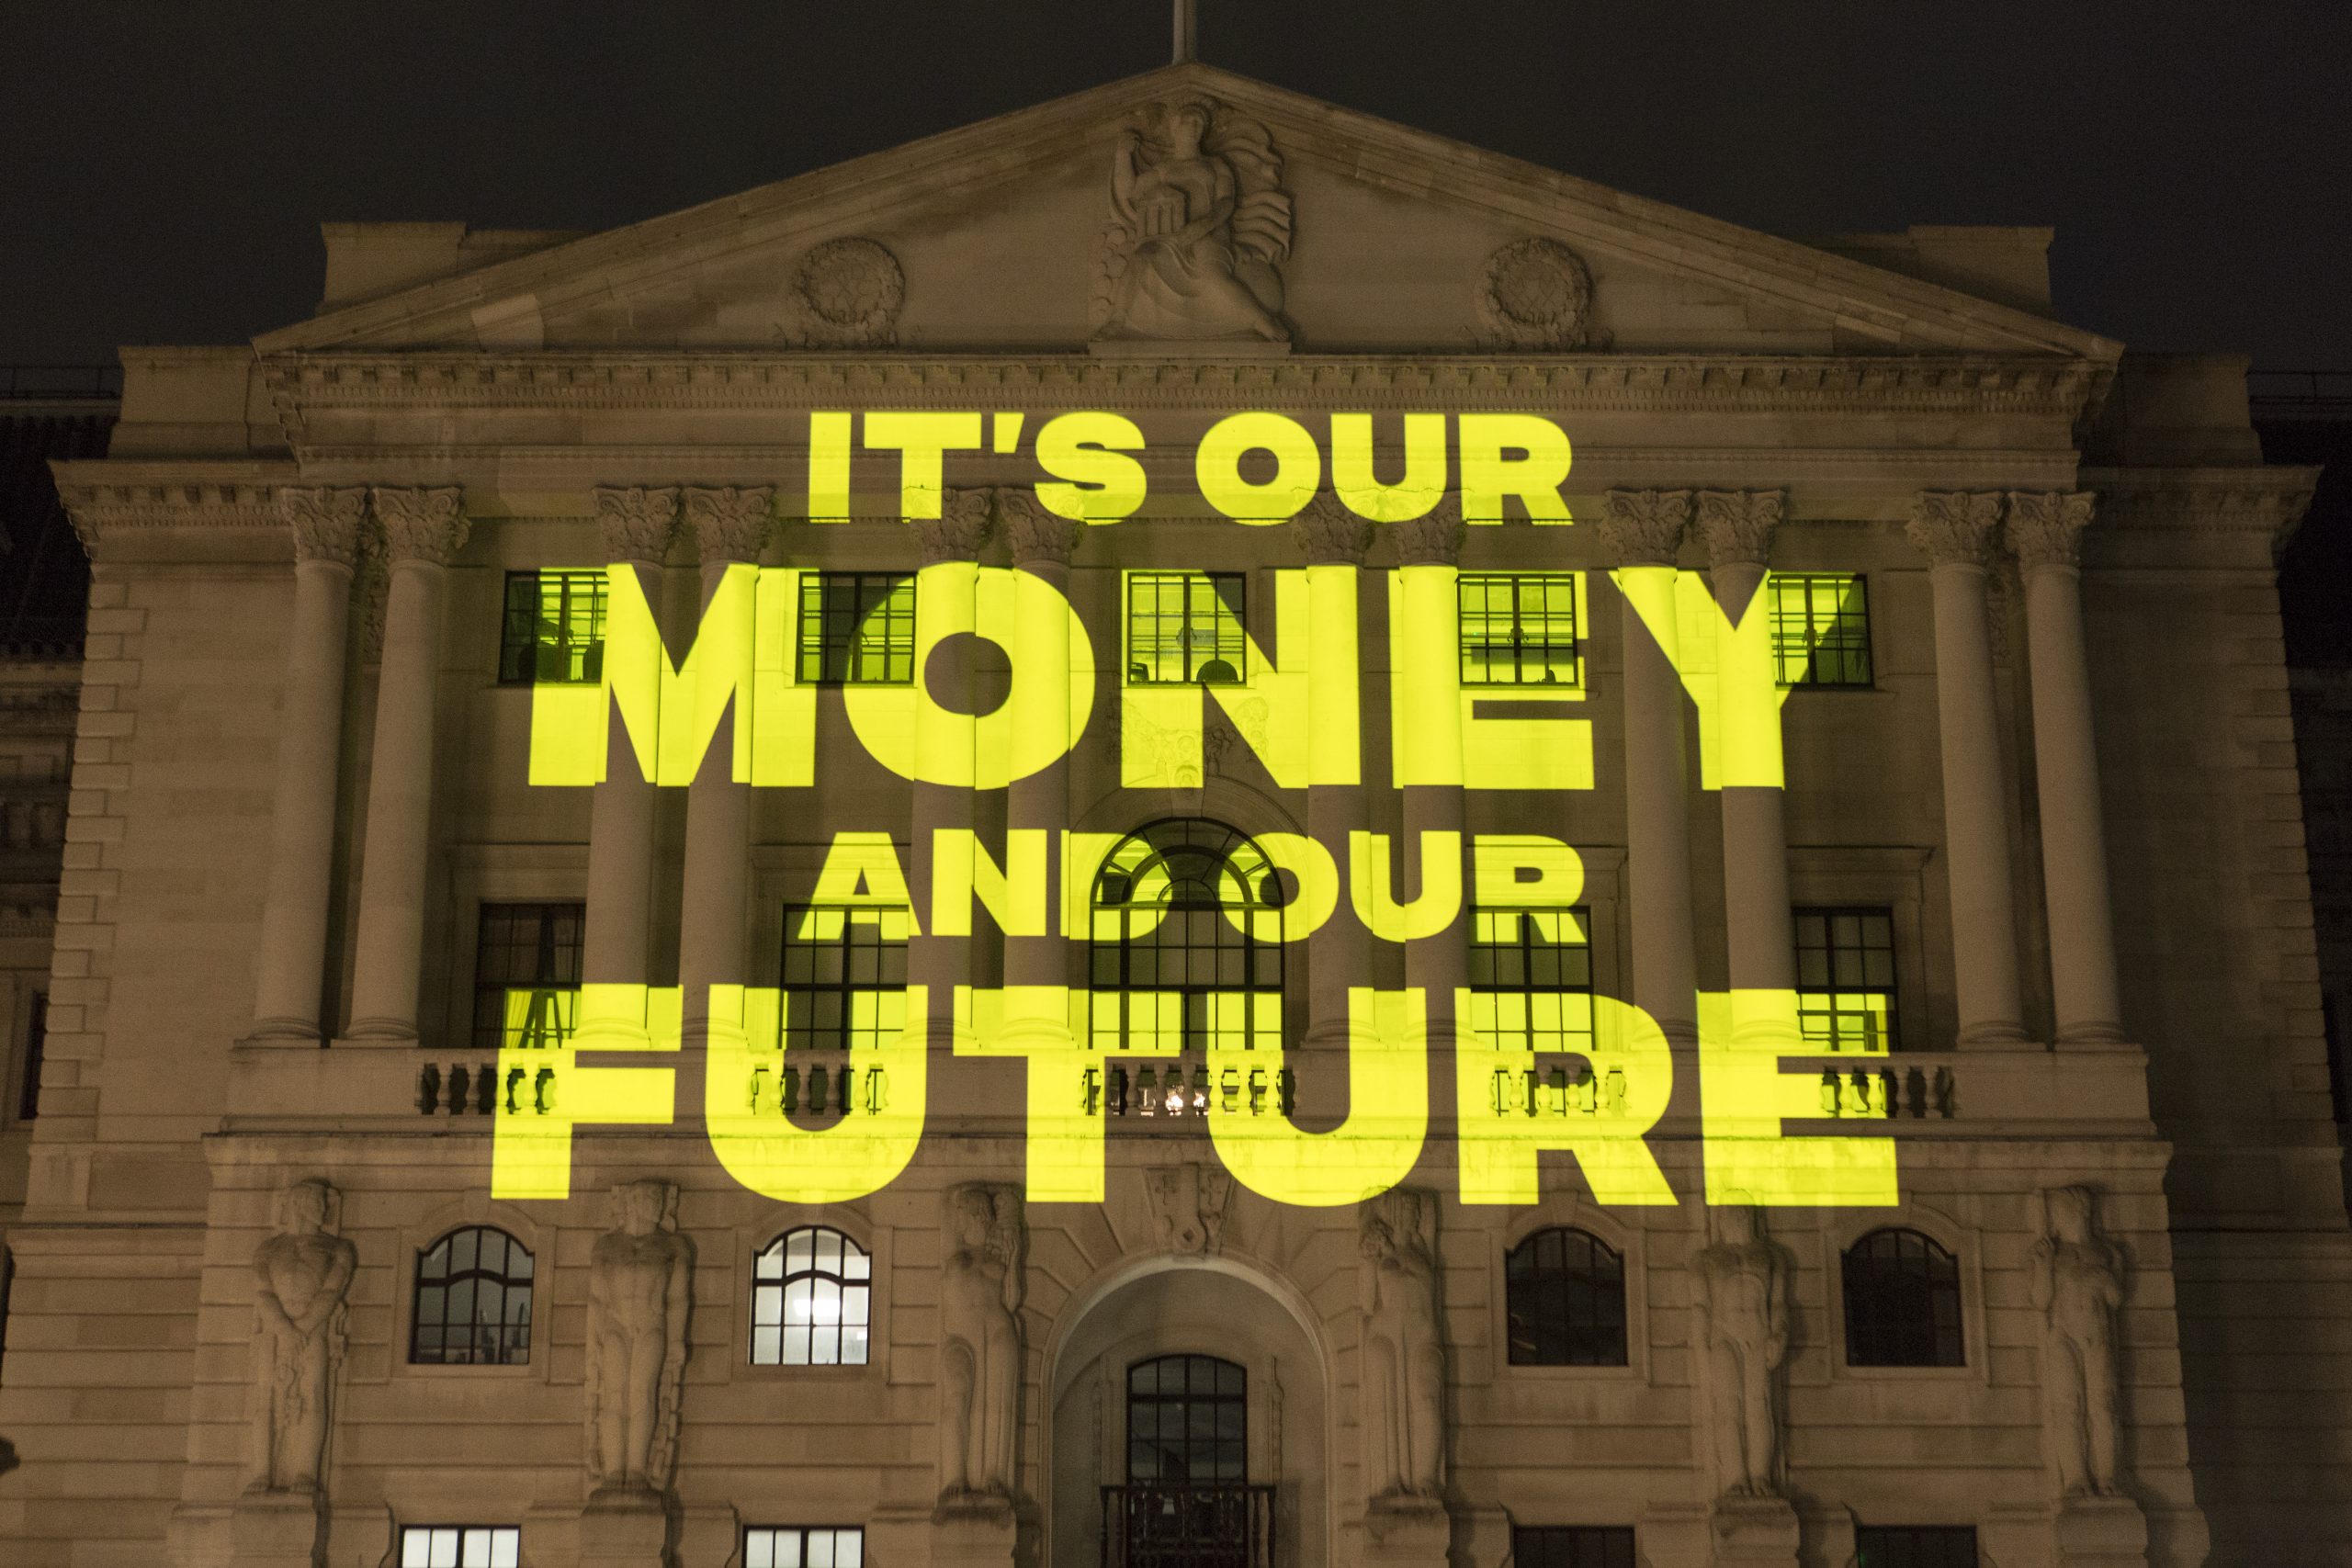 Projection on the Bank of England building reads 'It's our money and our future'